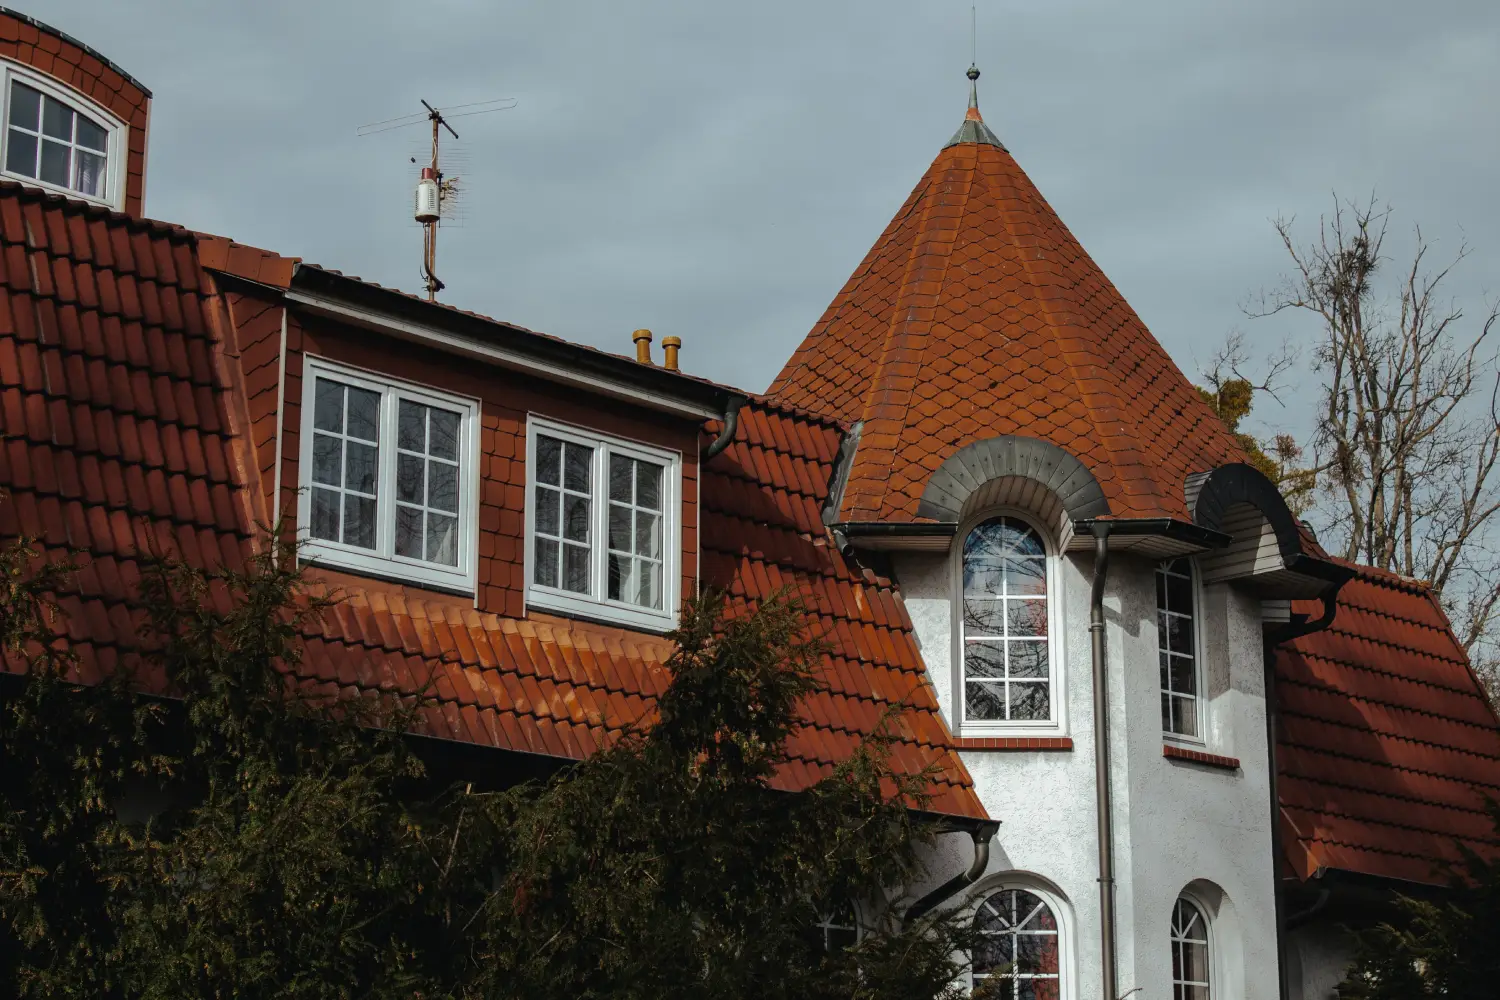 Choosing Reliable Roofing Company